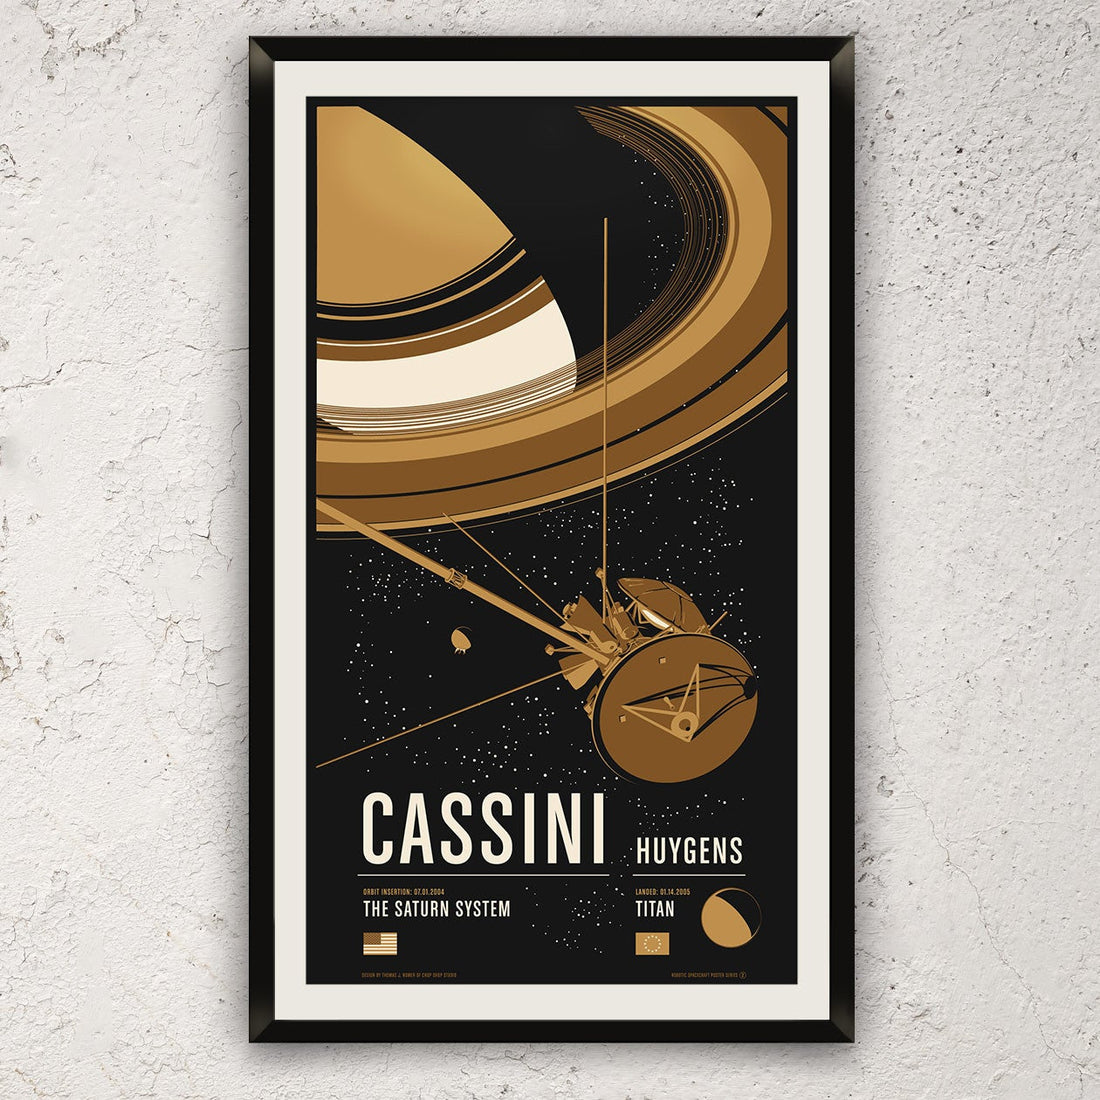 Making Our Cassini Huygens (Poster #2) from the Historic Spacecraft Series